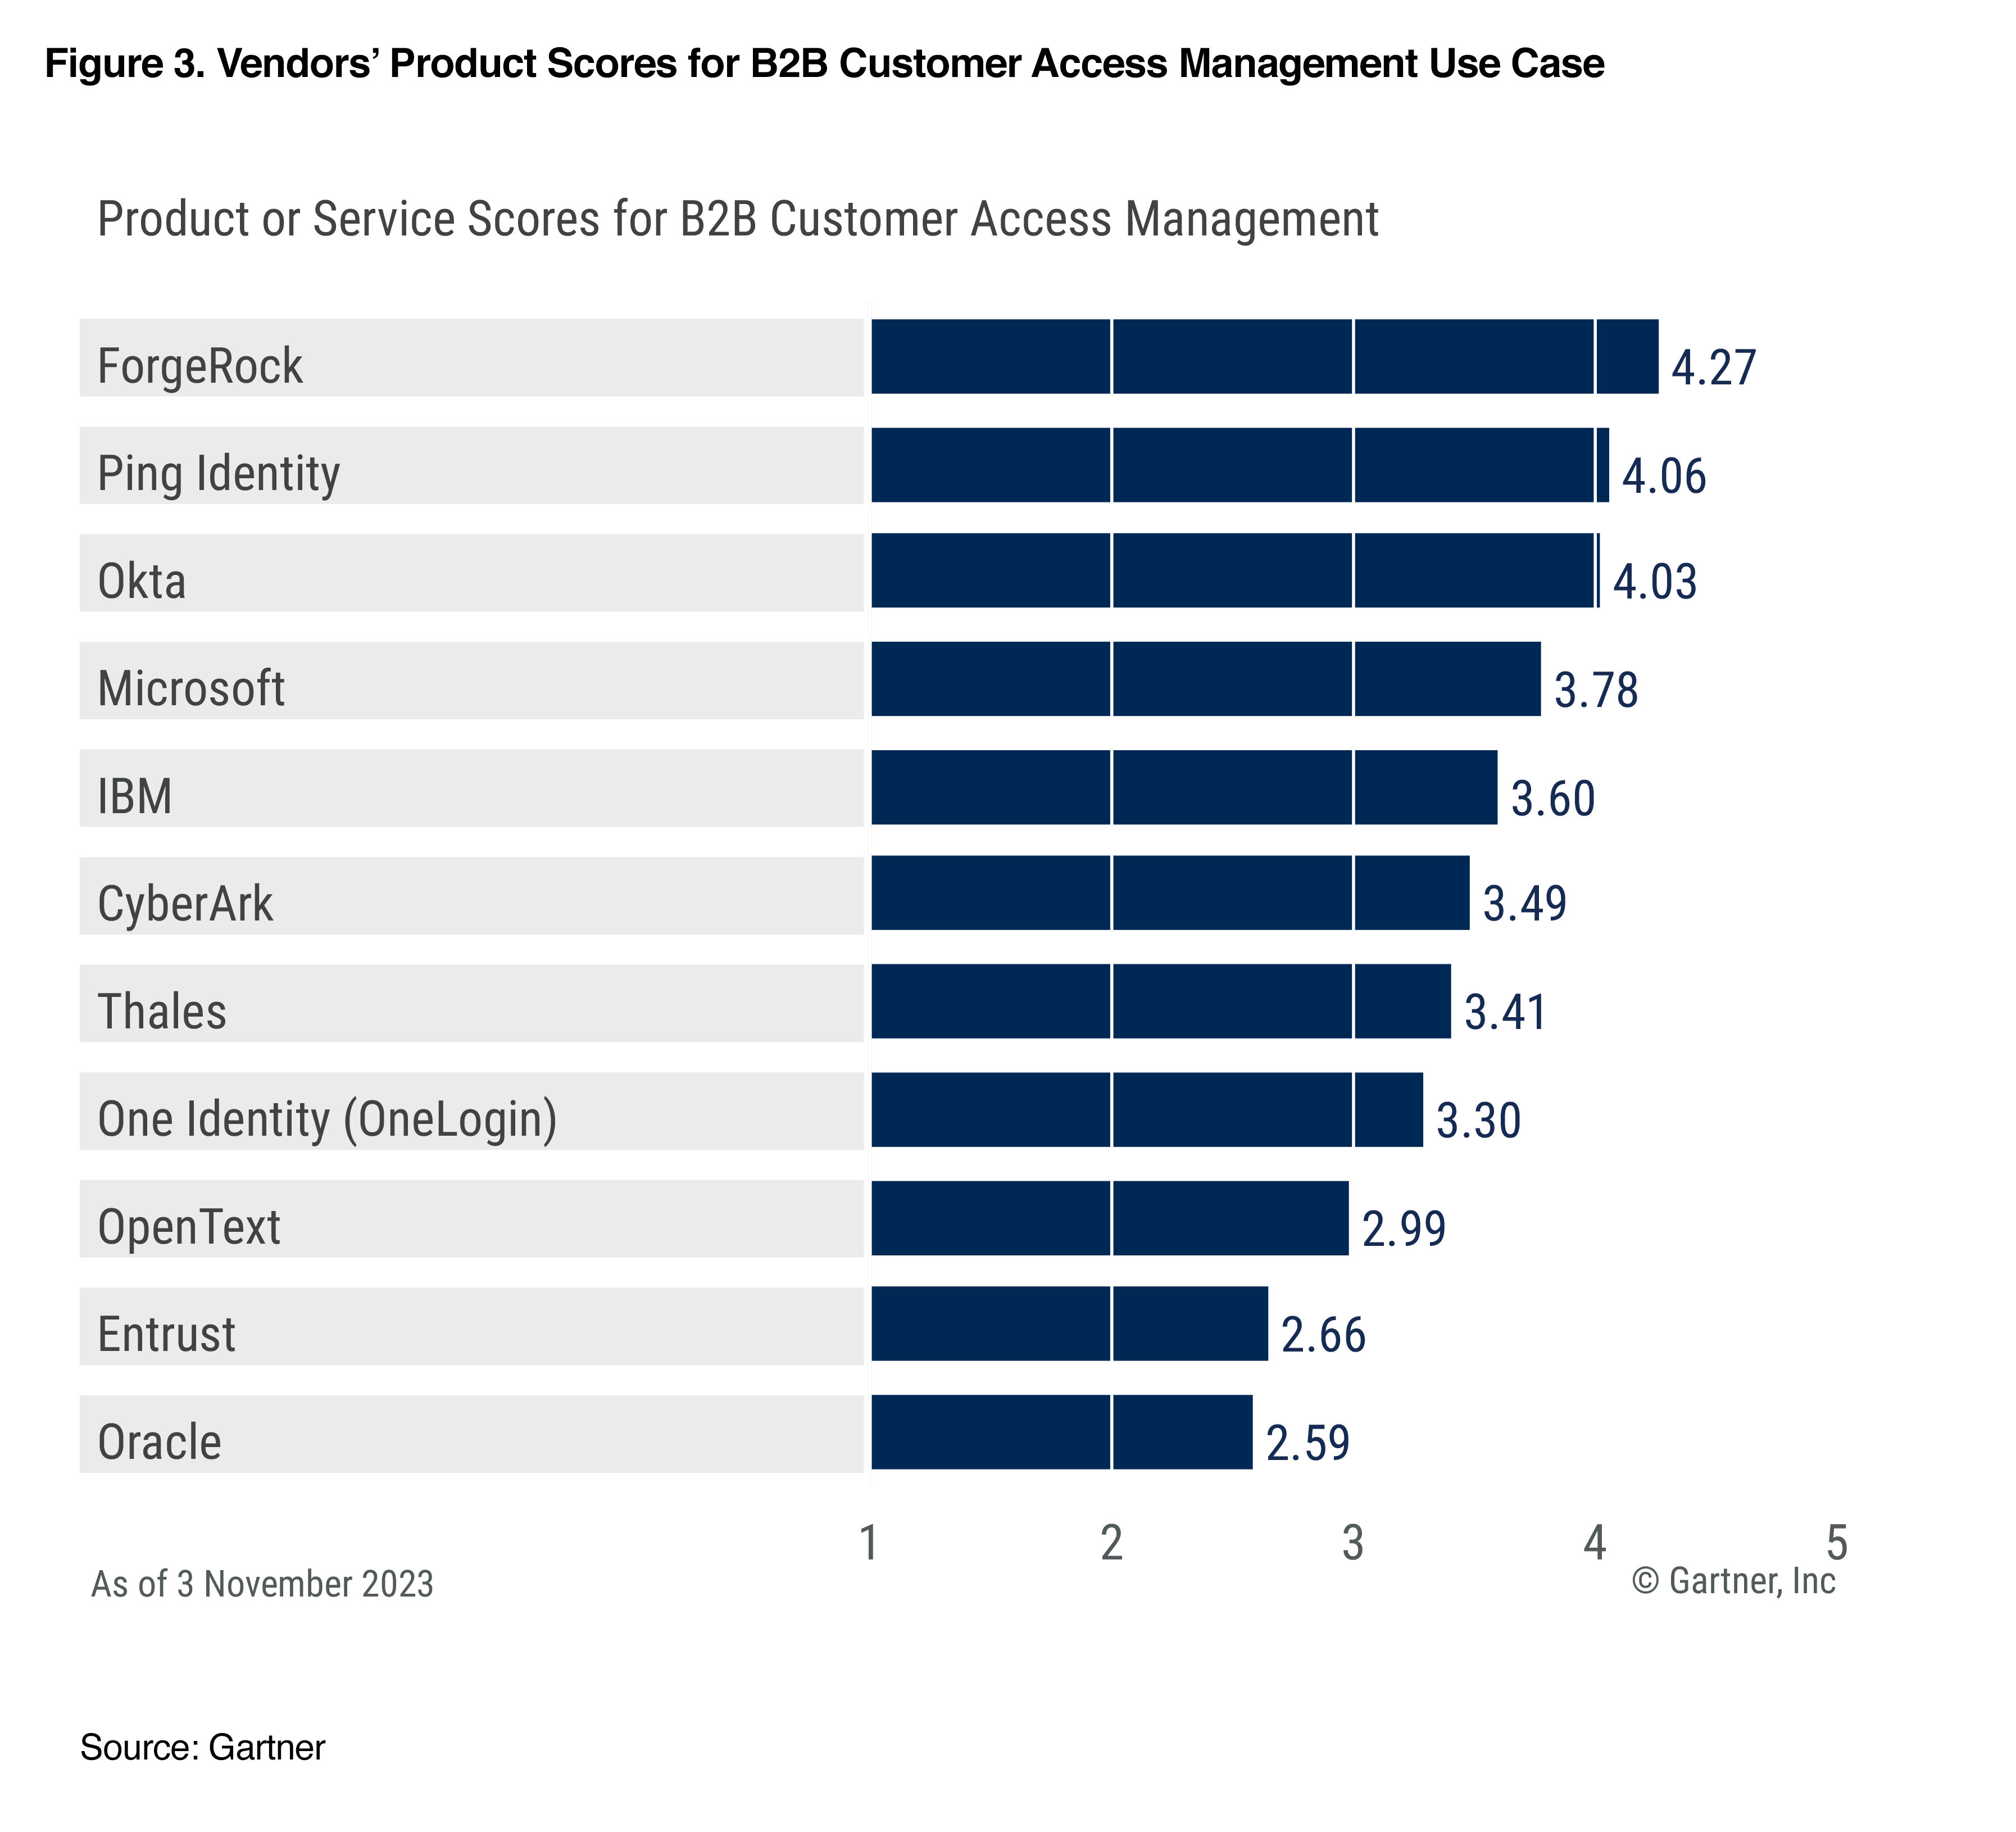 Vendors’ Product Scores for B2B Customer Access Management Use Case bar graph